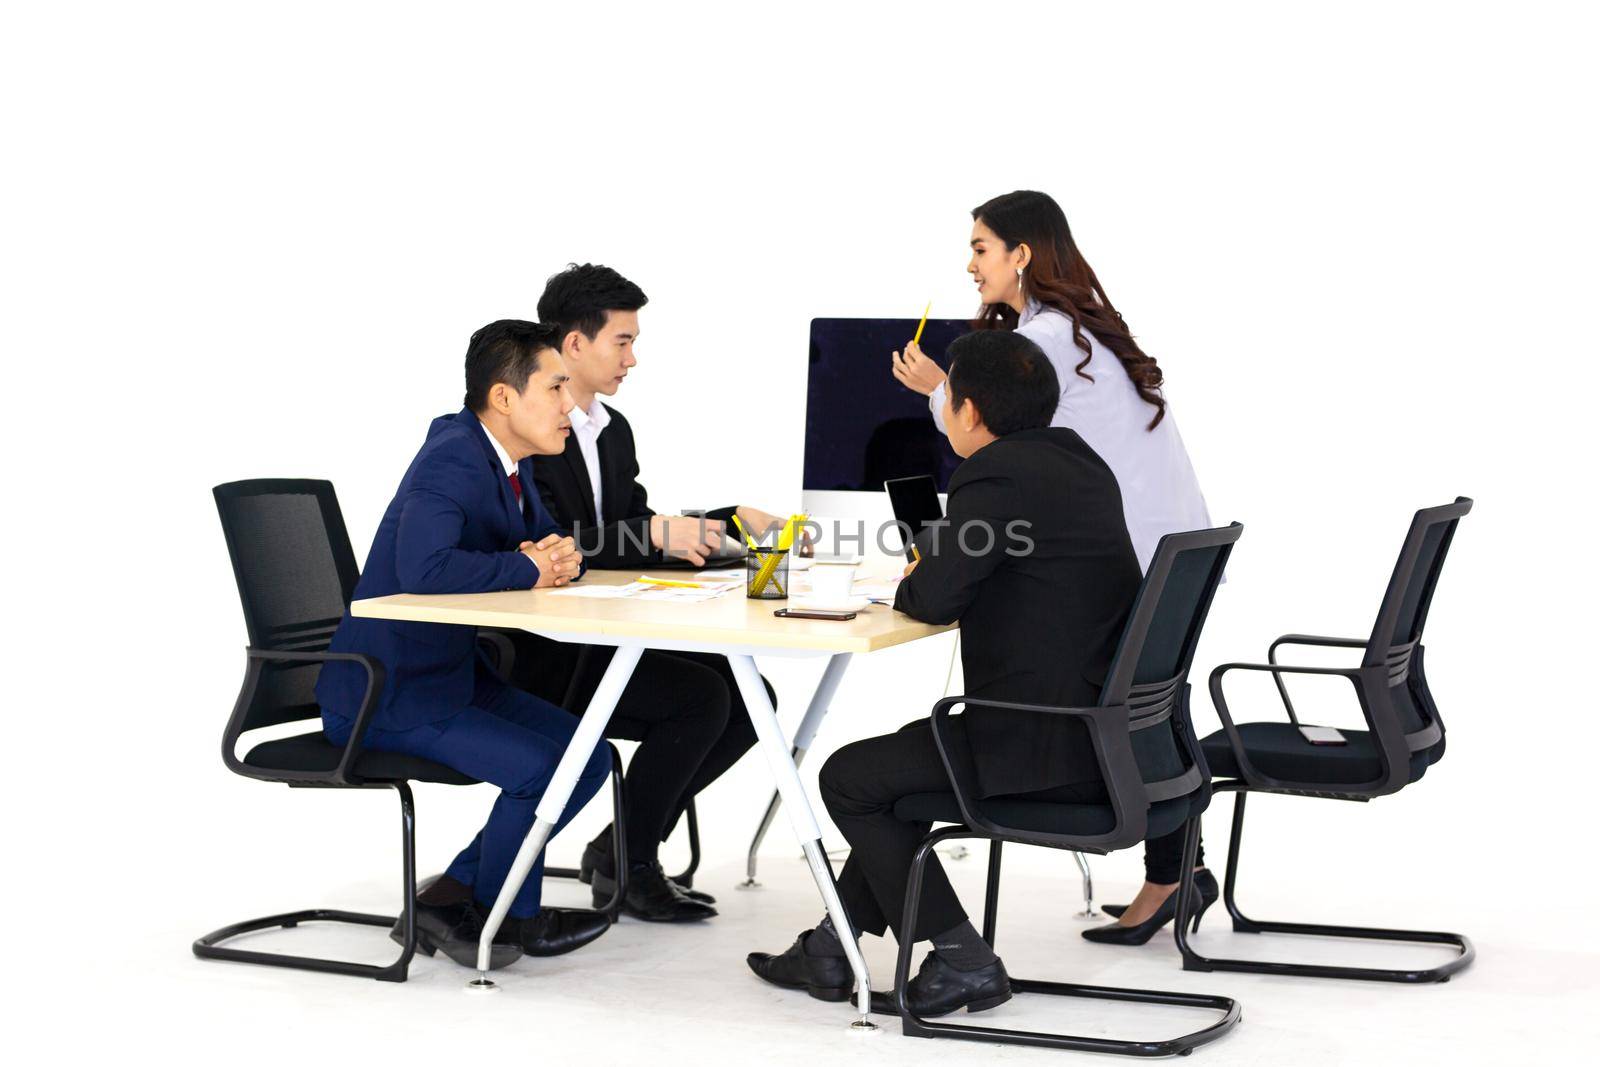 business people working on project at Modern Startup Office. Business People Meeting Discussion Working Concept, business people are meeting to analyze data for marketing plan